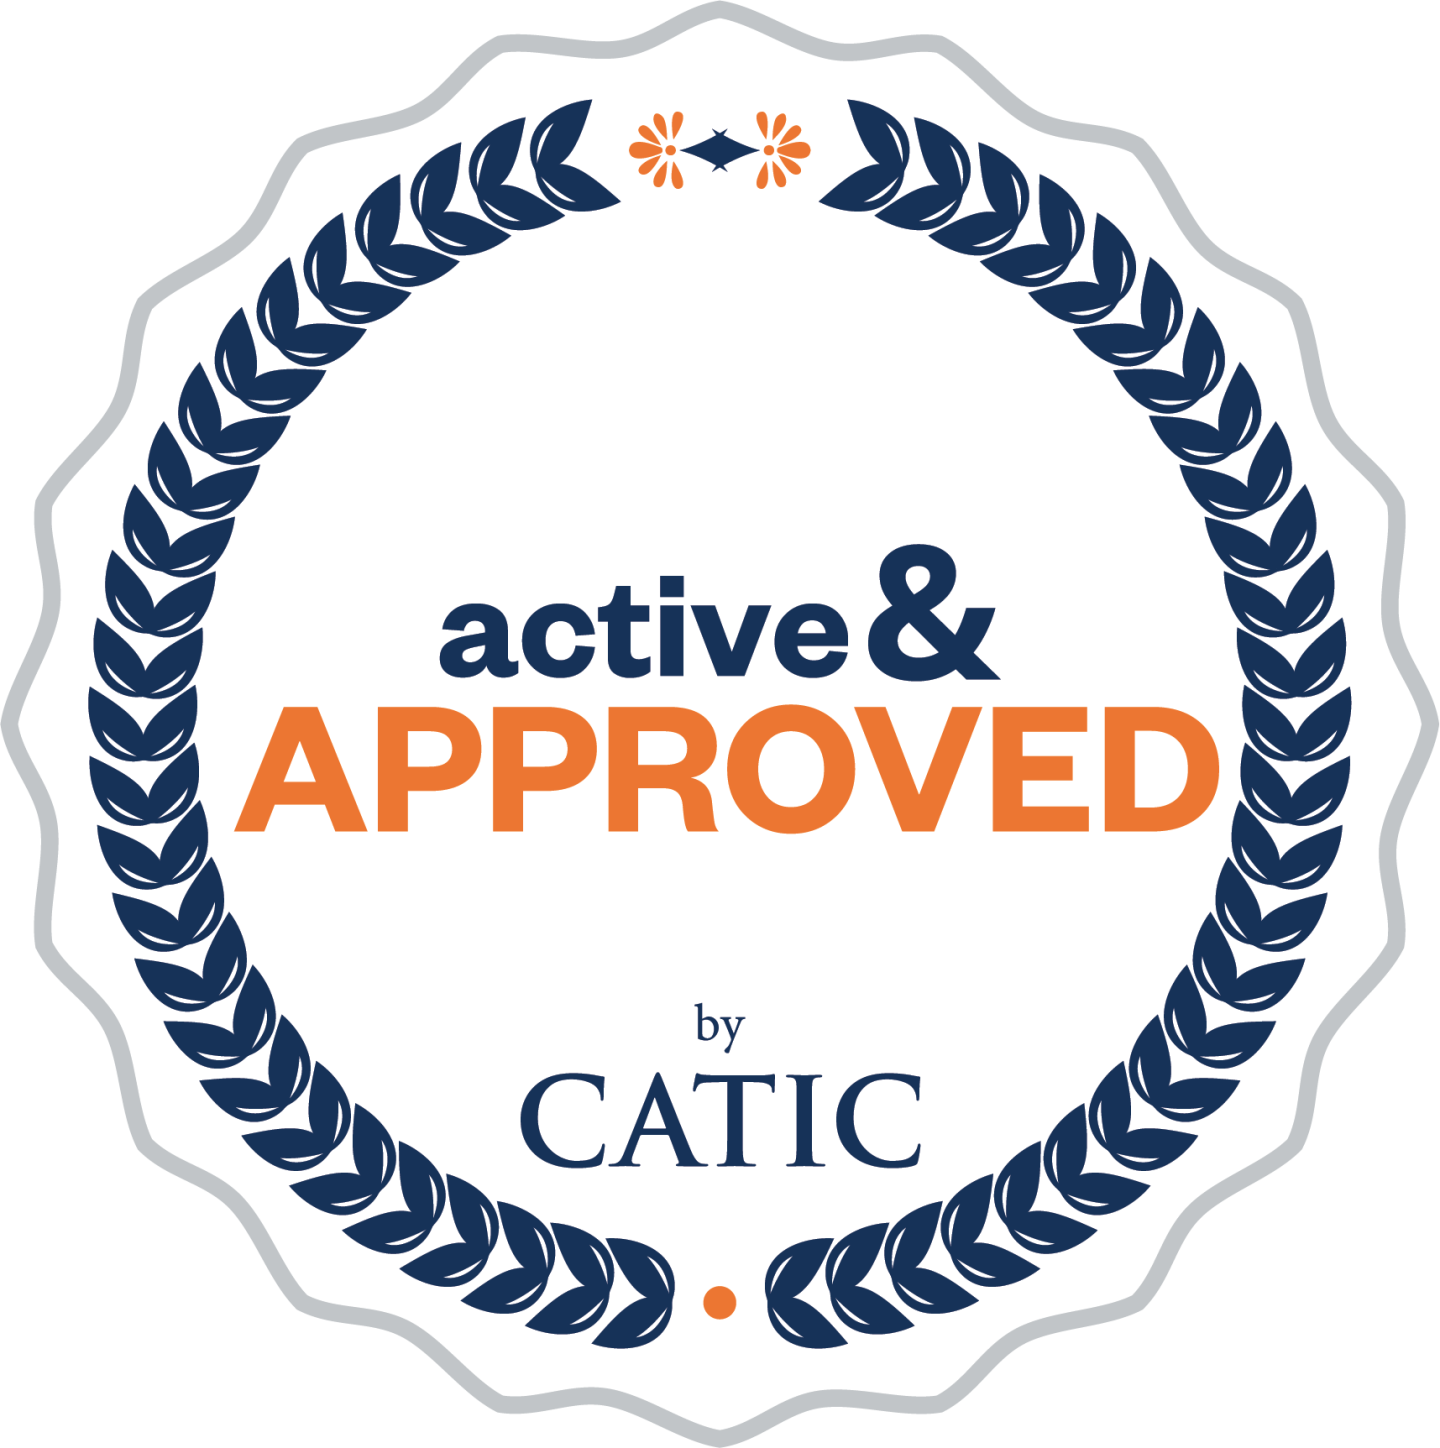 Active & Approved logo